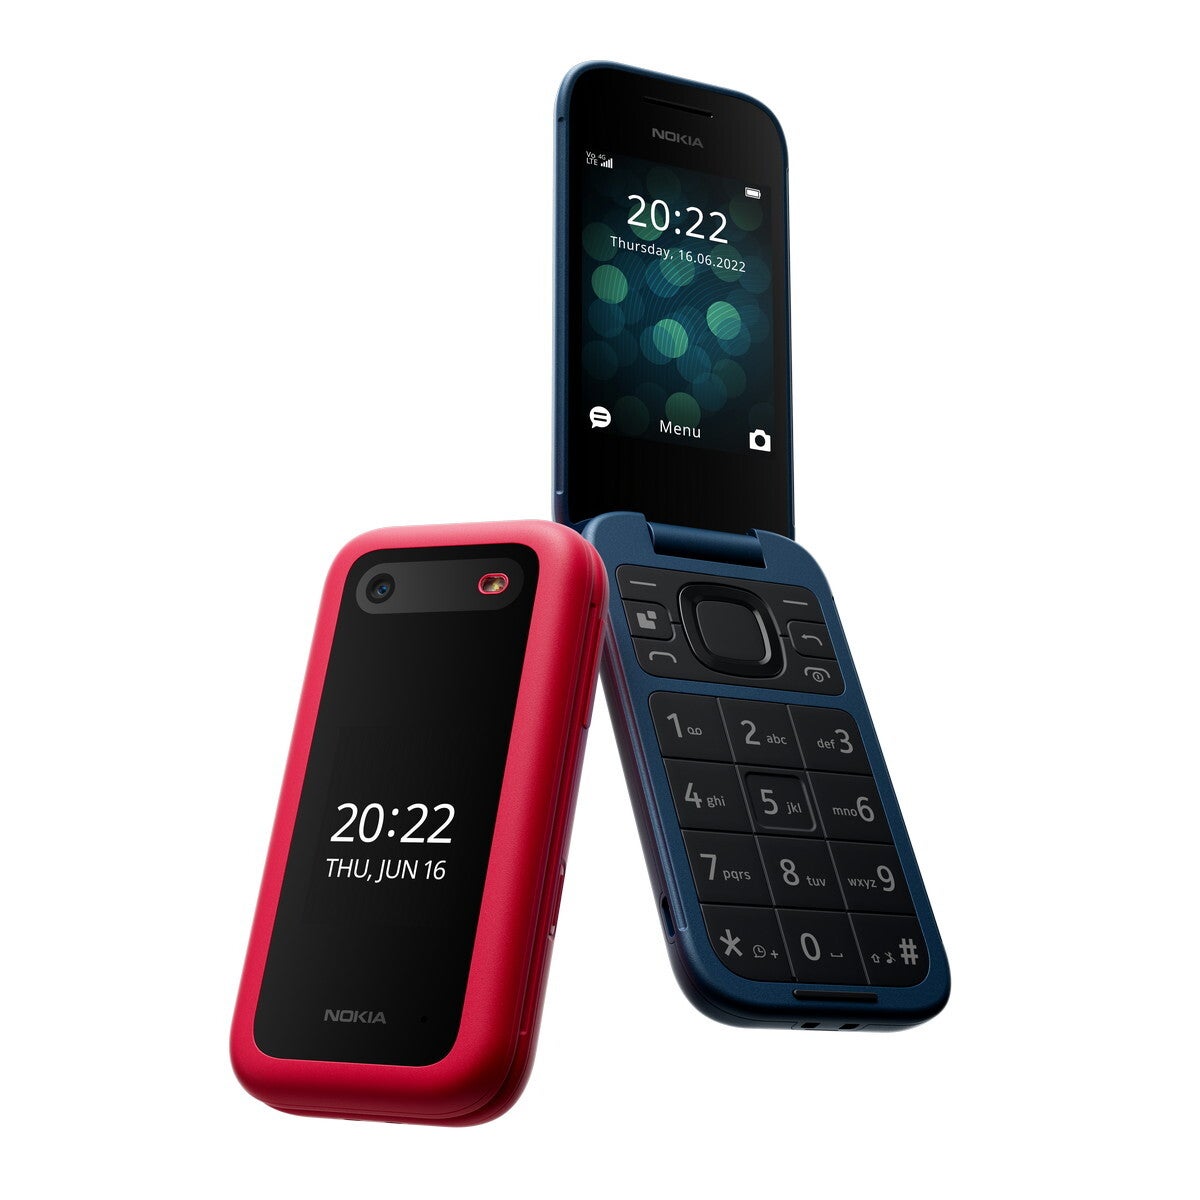 Nokia 2660 - Nokia brings back the retro charm with three feature phones, Android tablet